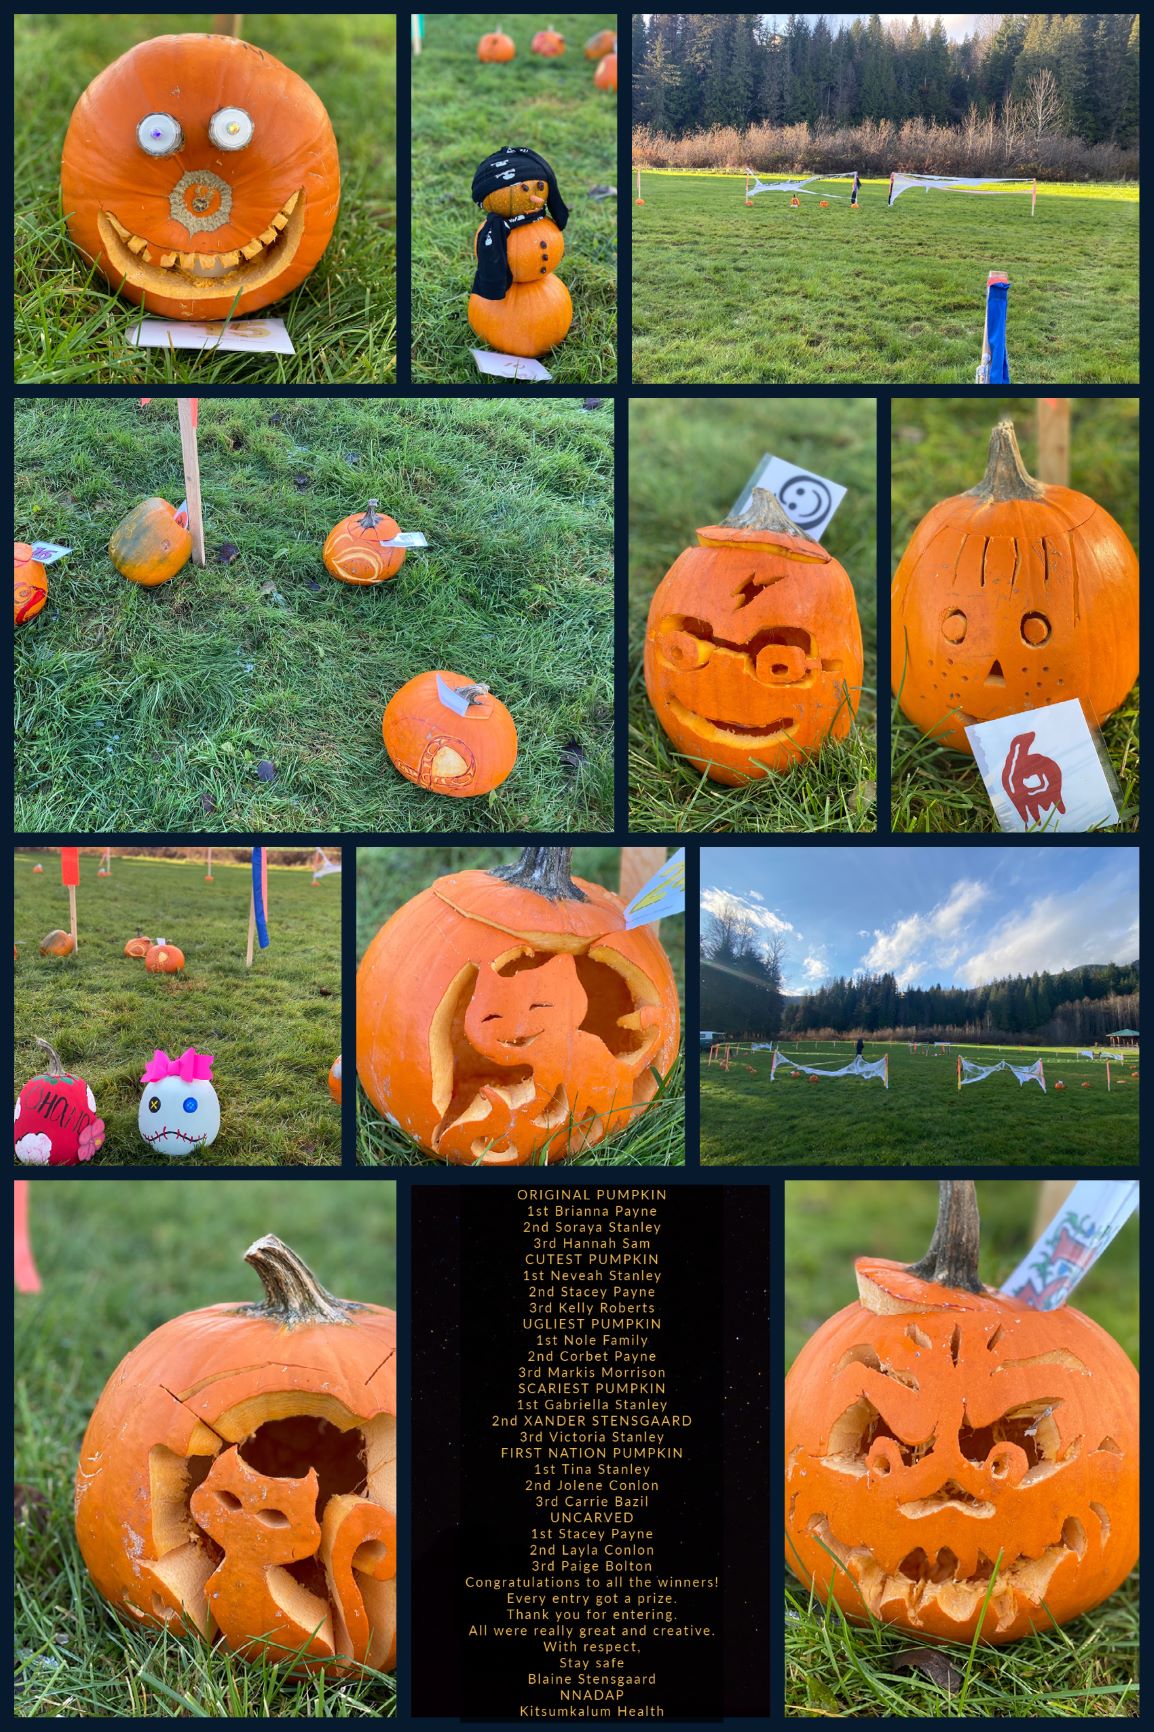 Pumpkin Carving – Thank you for entering the contest